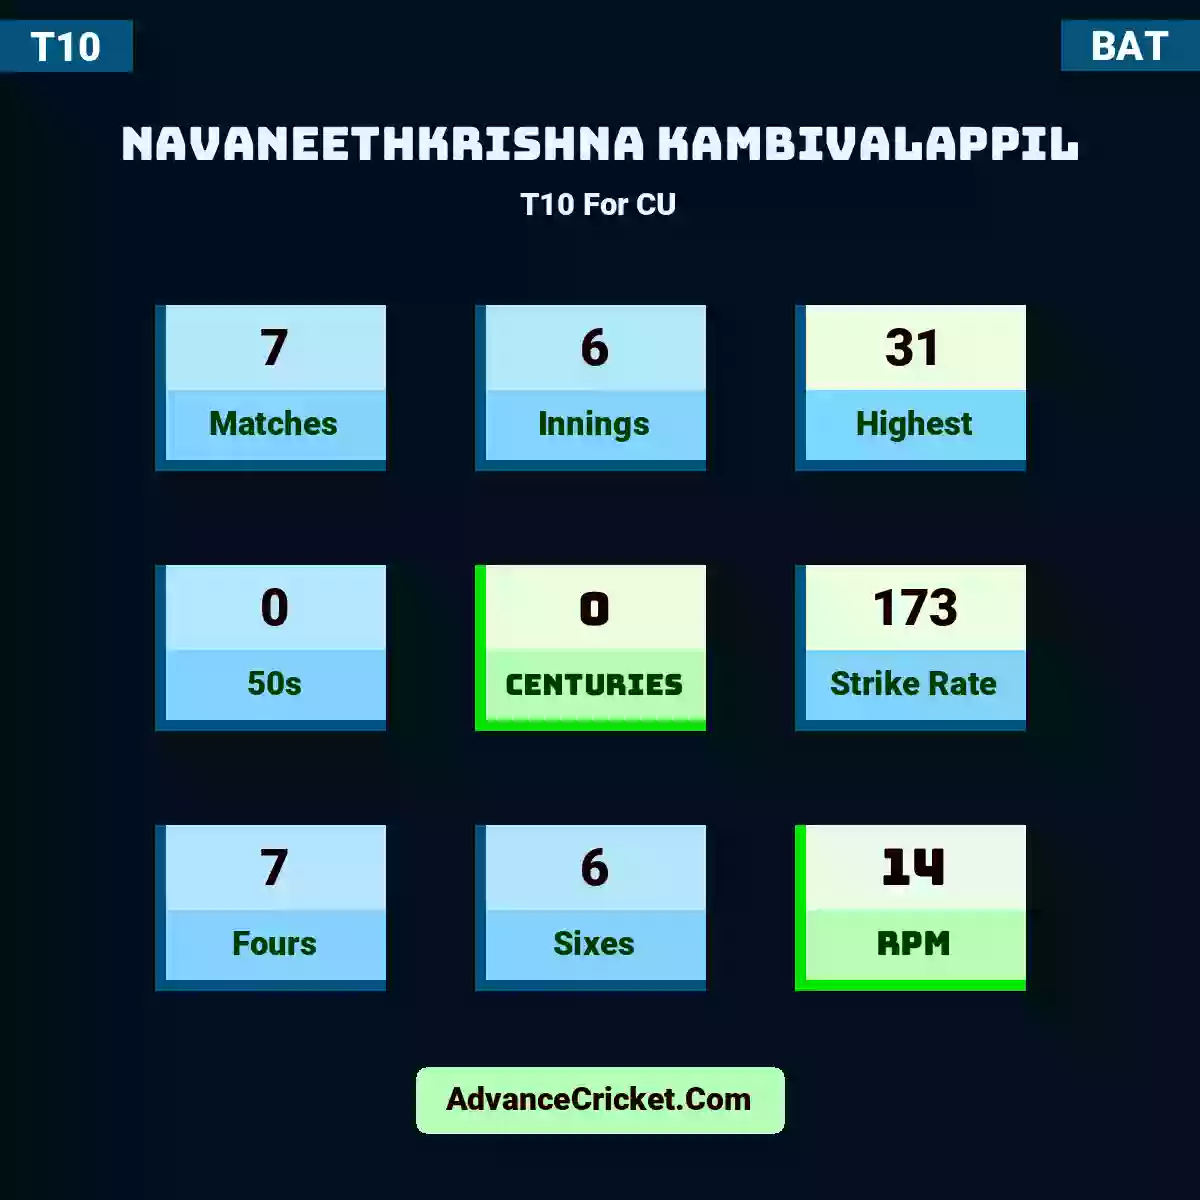 Navaneethkrishna Kambivalappil T10  For CU, Navaneethkrishna Kambivalappil played 7 matches, scored 31 runs as highest, 0 half-centuries, and 0 centuries, with a strike rate of 173. N.Kambivalappil hit 7 fours and 6 sixes, with an RPM of 14.